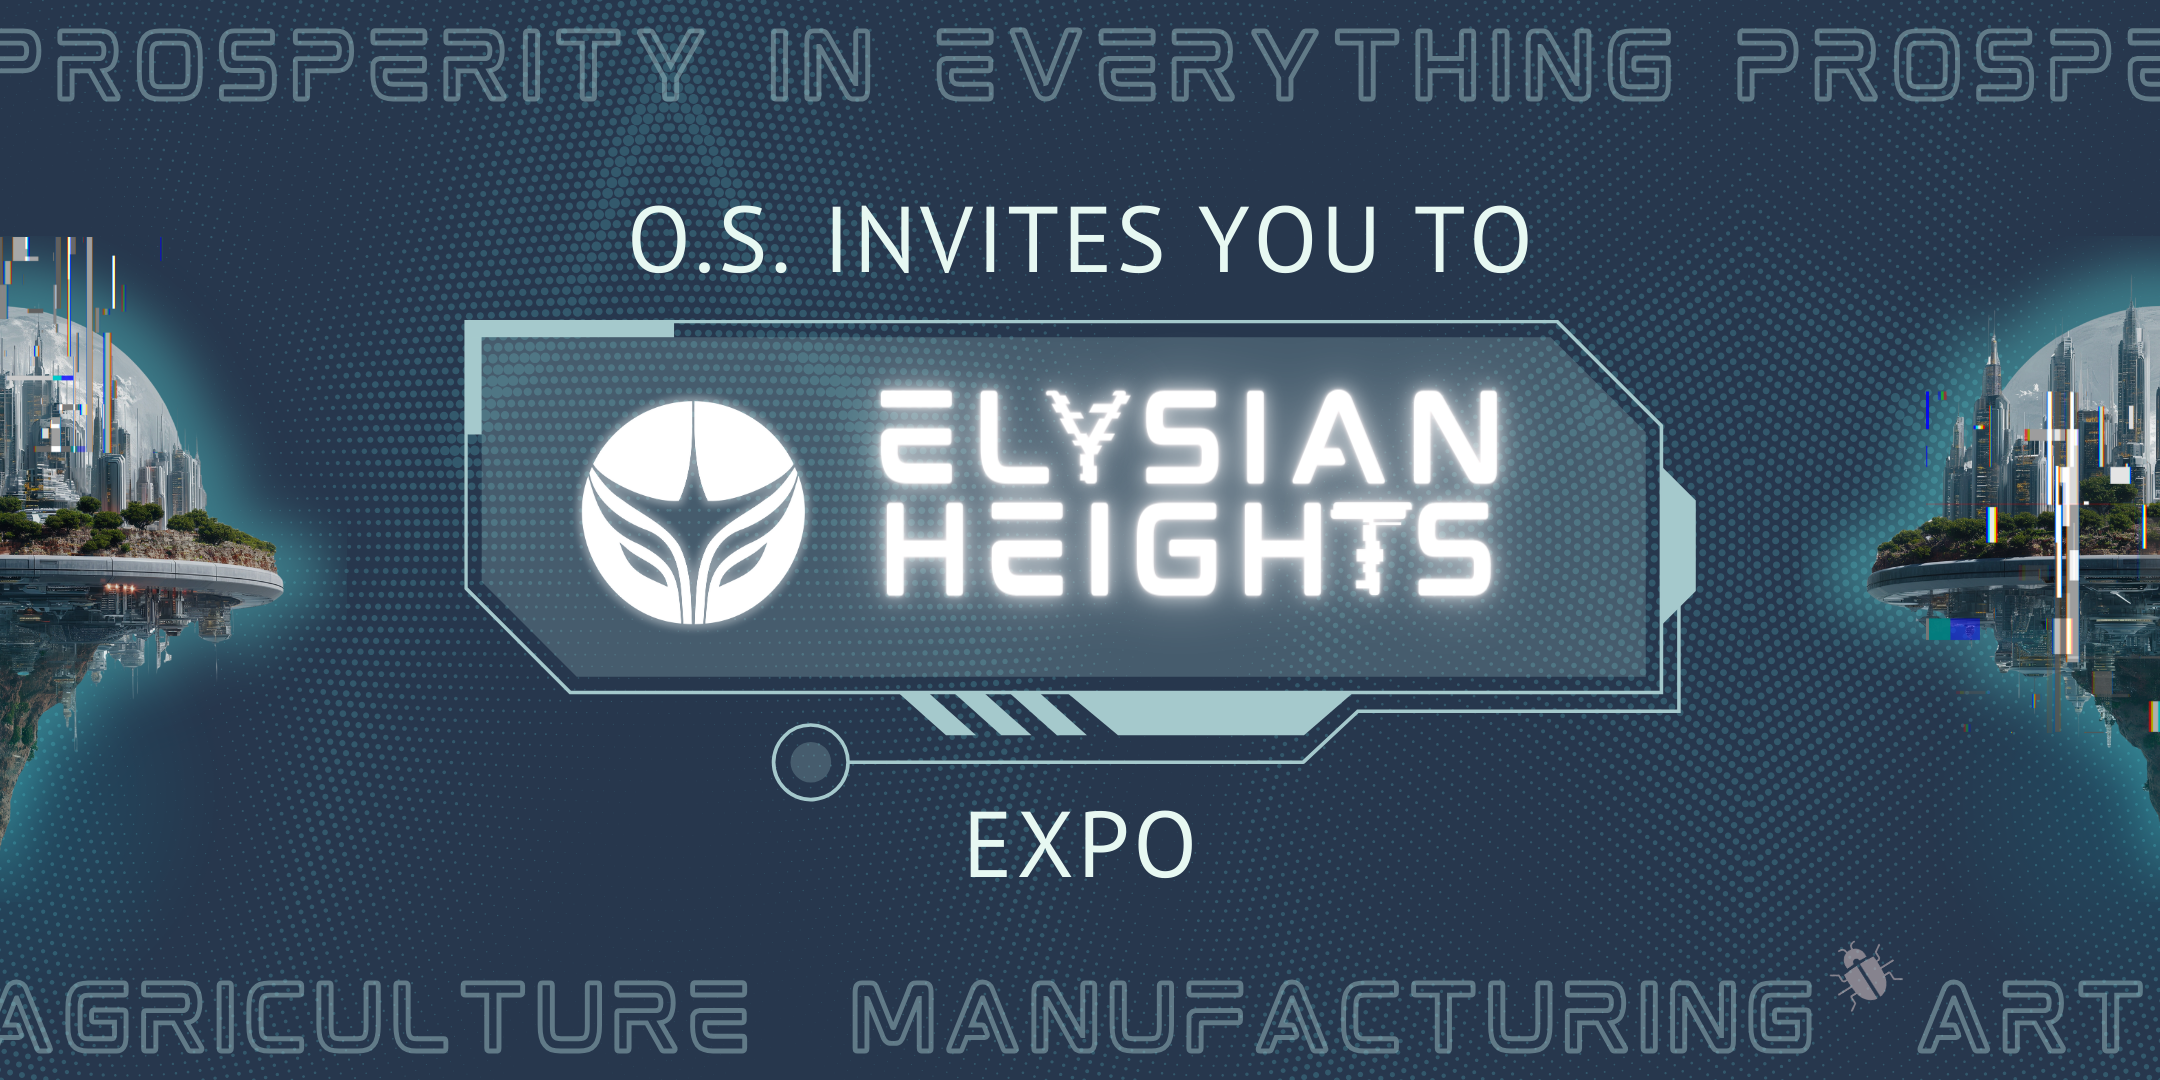 O.S. Invites You To Elysian Heights Expo